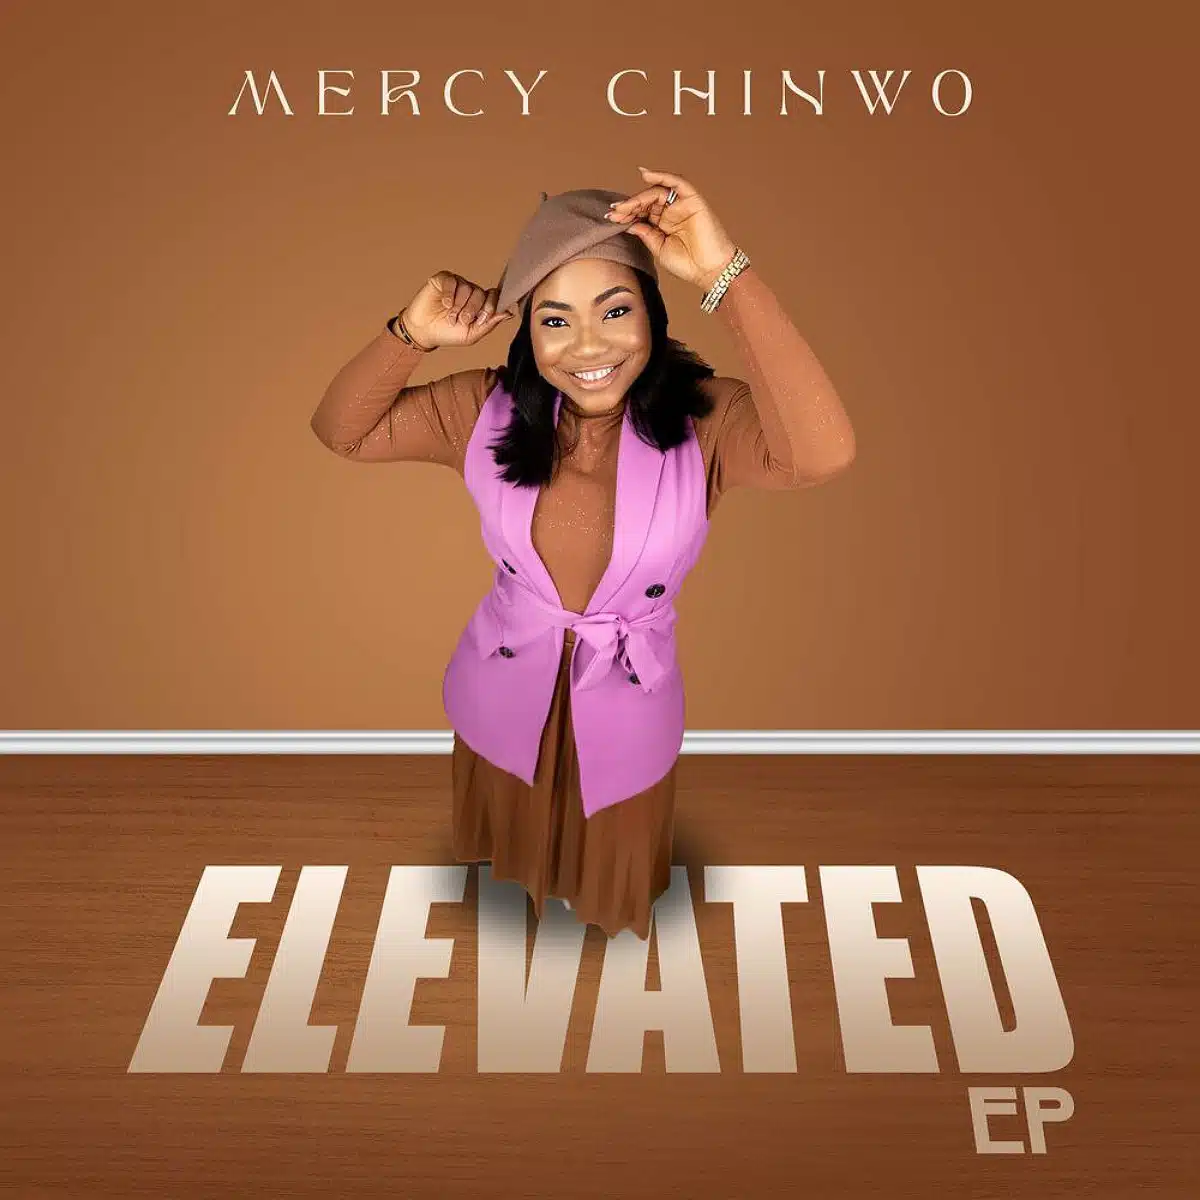 DOWNLOAD MIXTAPE: Mercy Chinwo – “Elevated Ep” | Full Ep